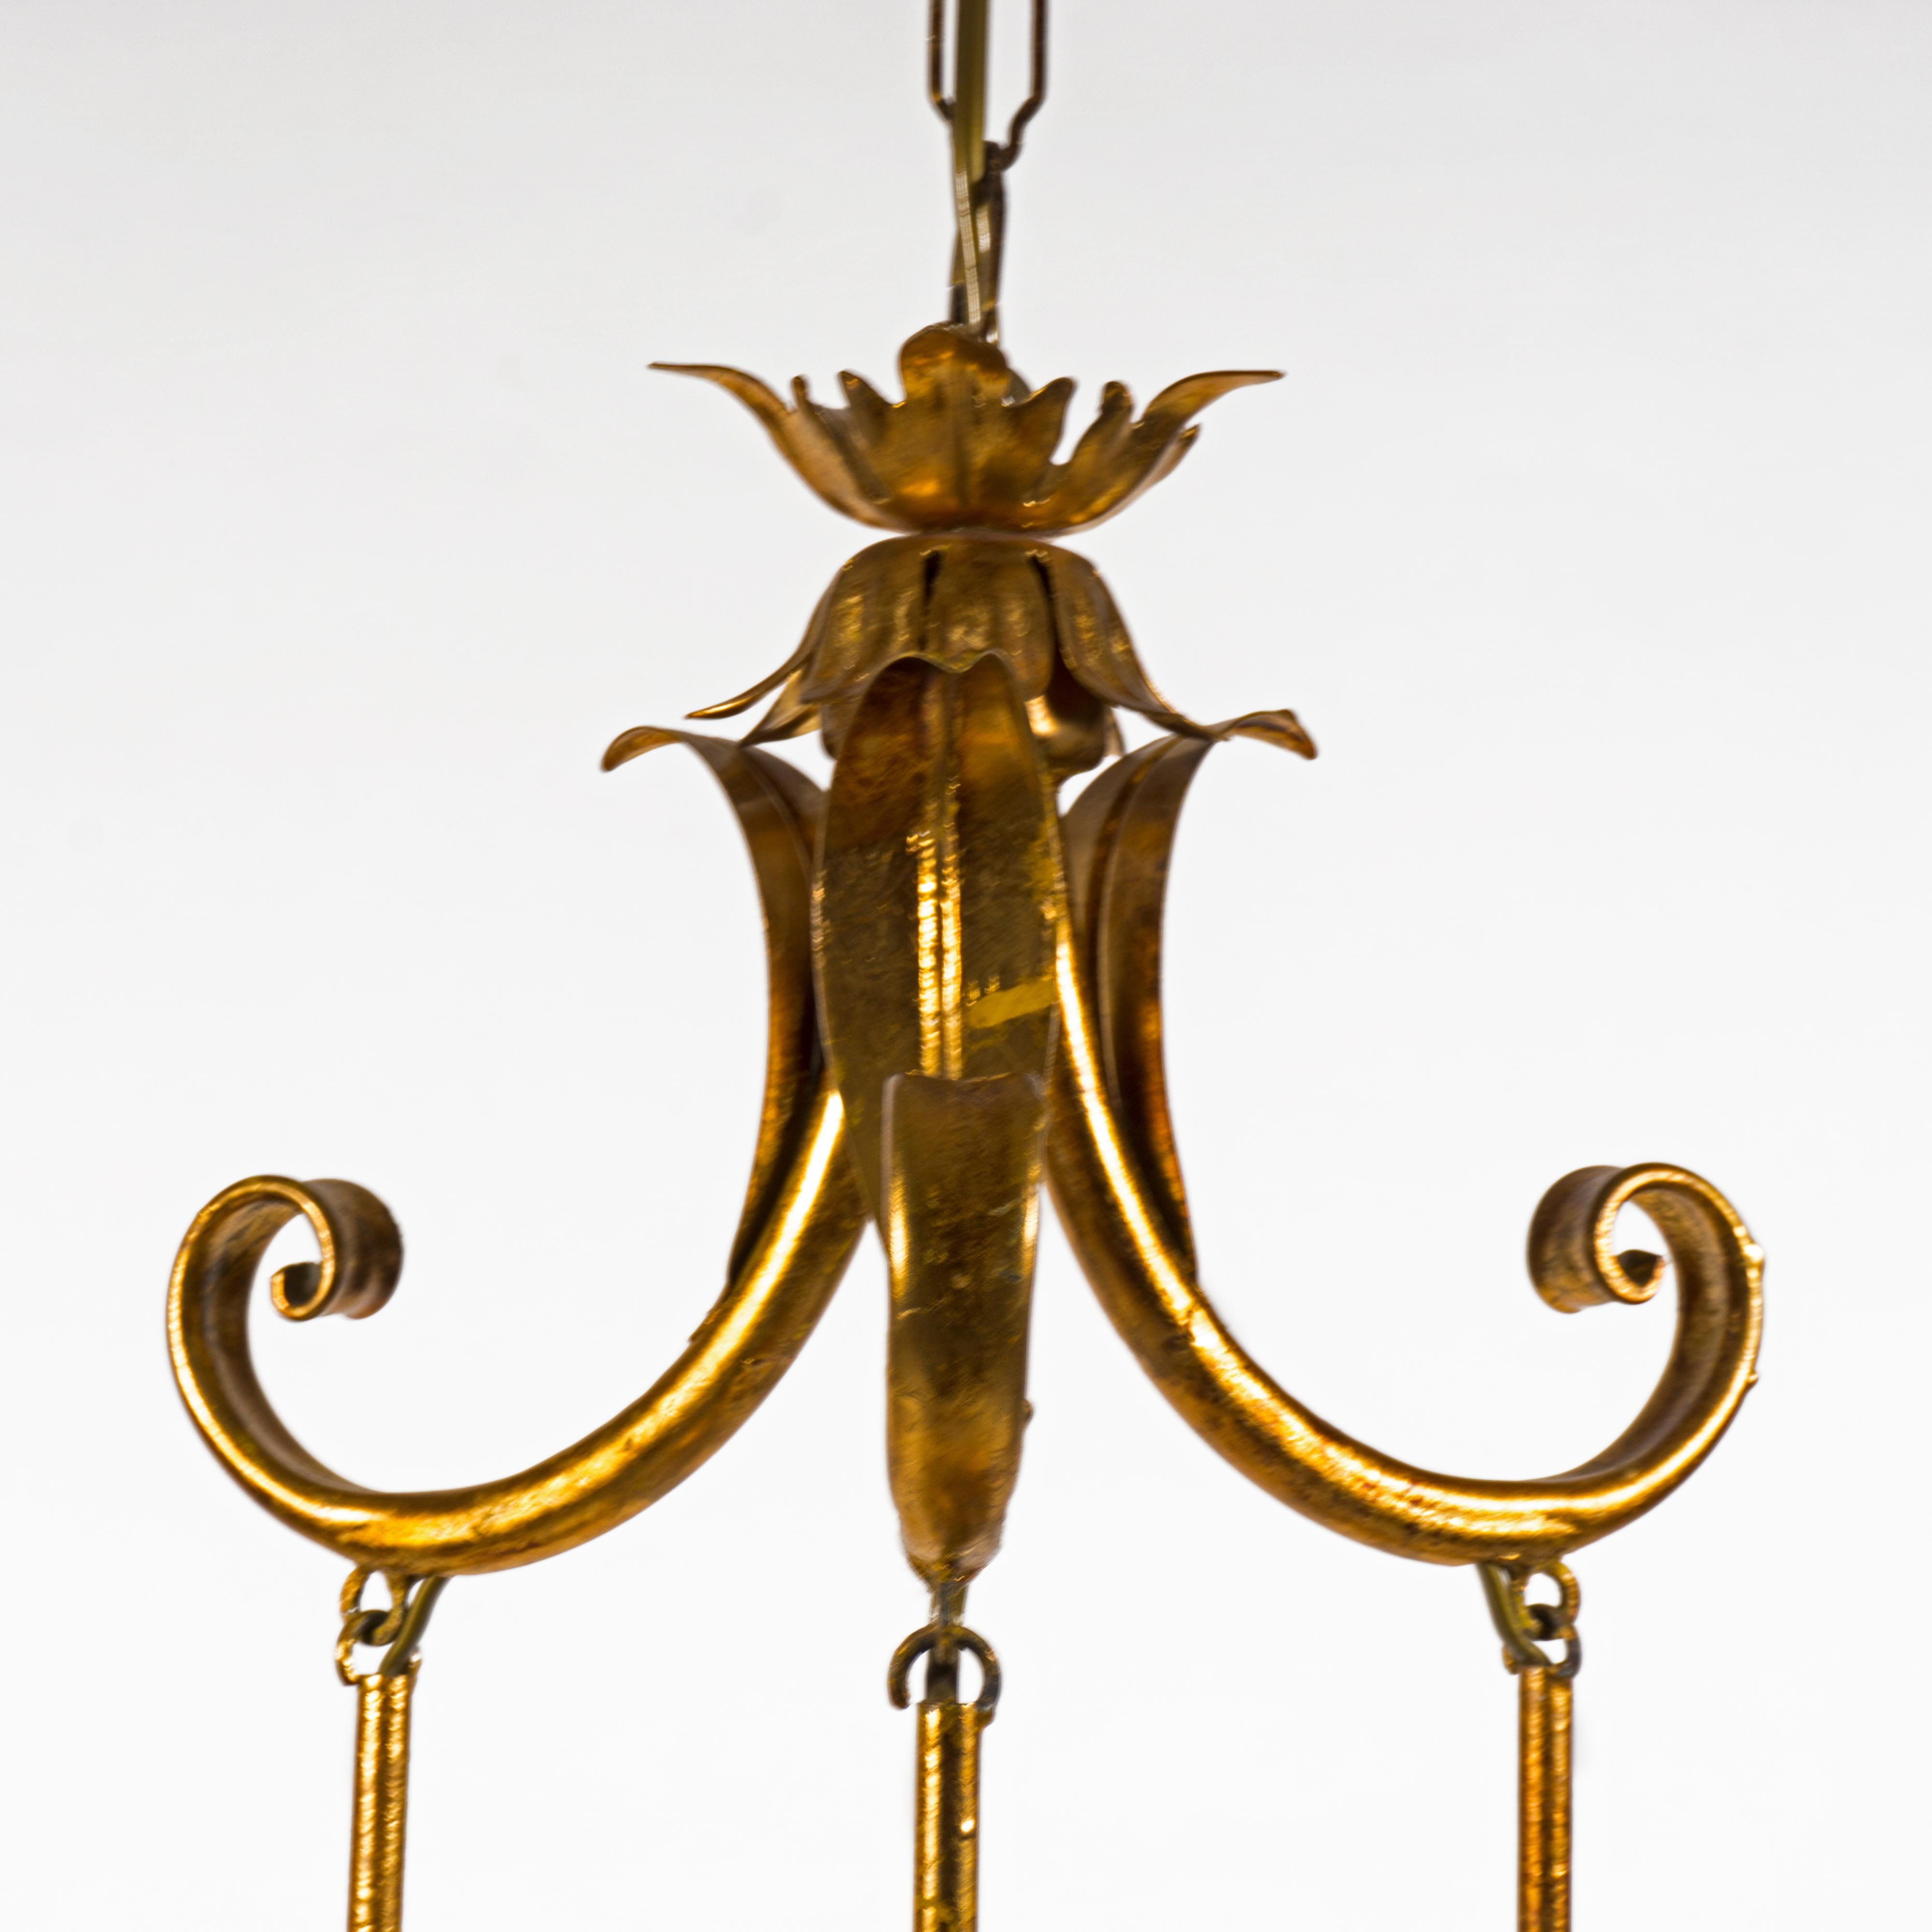 Iron Giltet Floral 1970s Pendant Light Chandelier by Banci Firenze, Italy